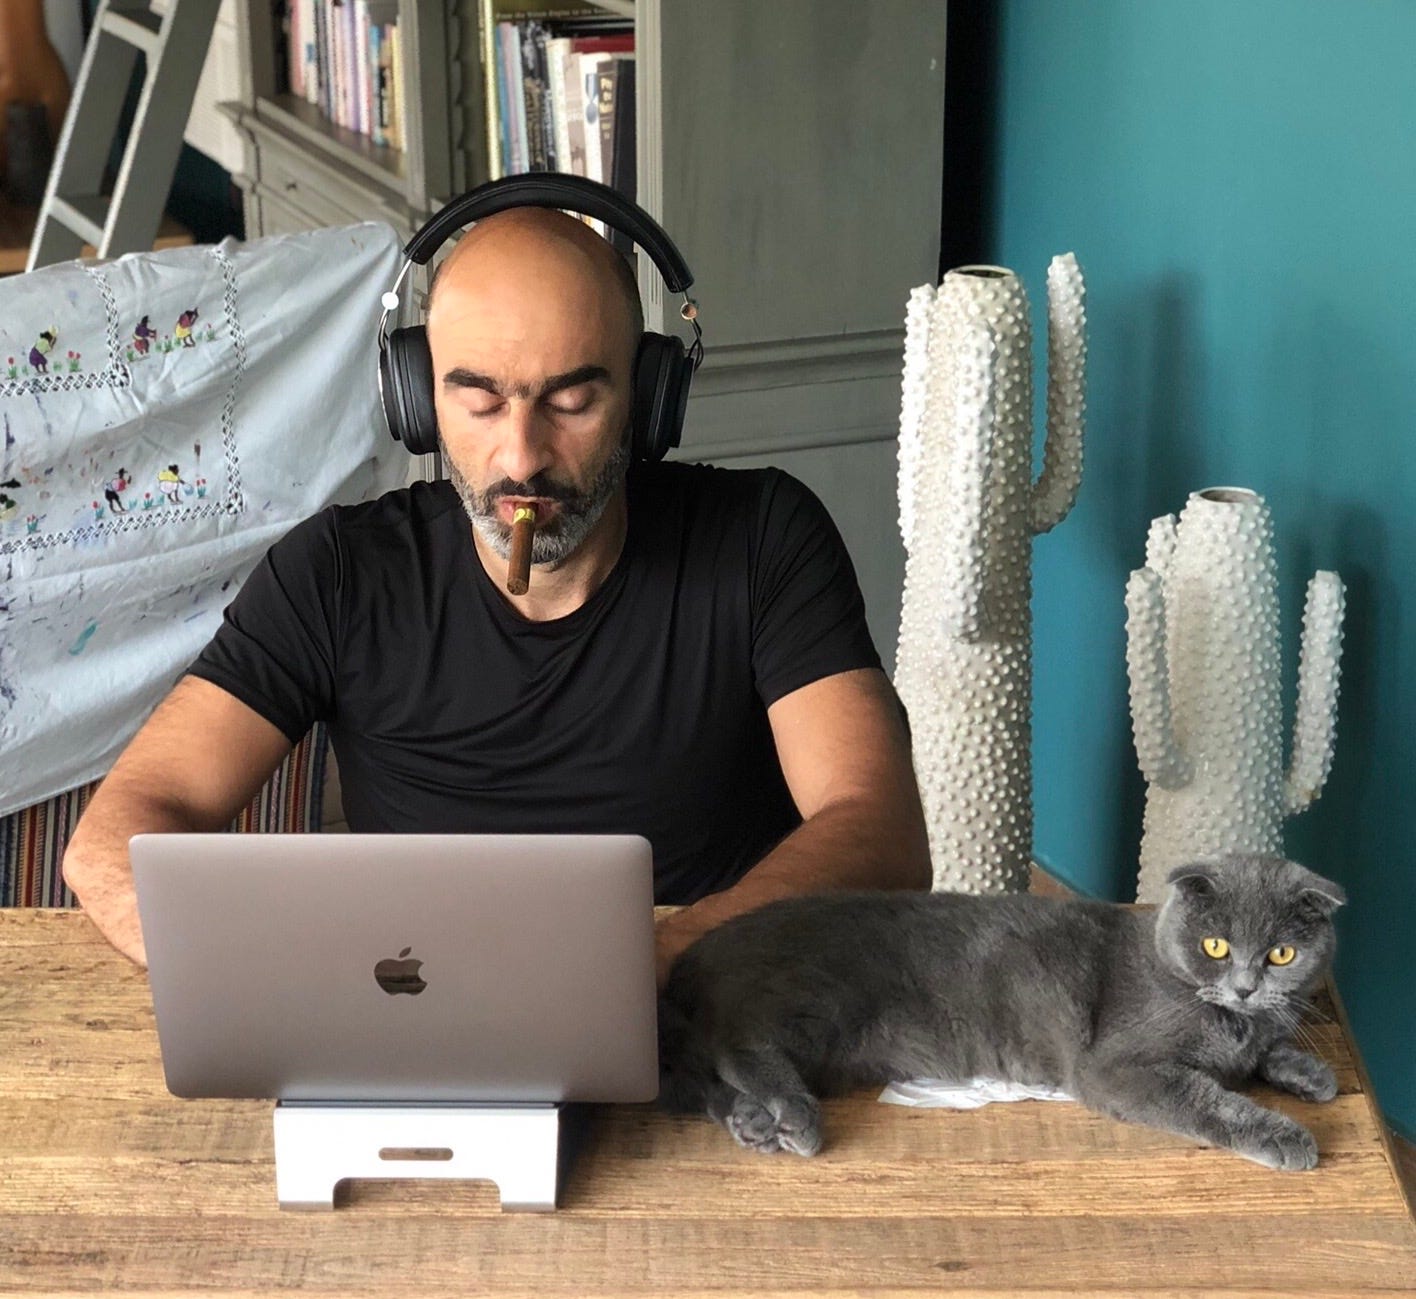 A person wearing headphones and smoking a cigar while sitting at a desk with a cat

Description automatically generated